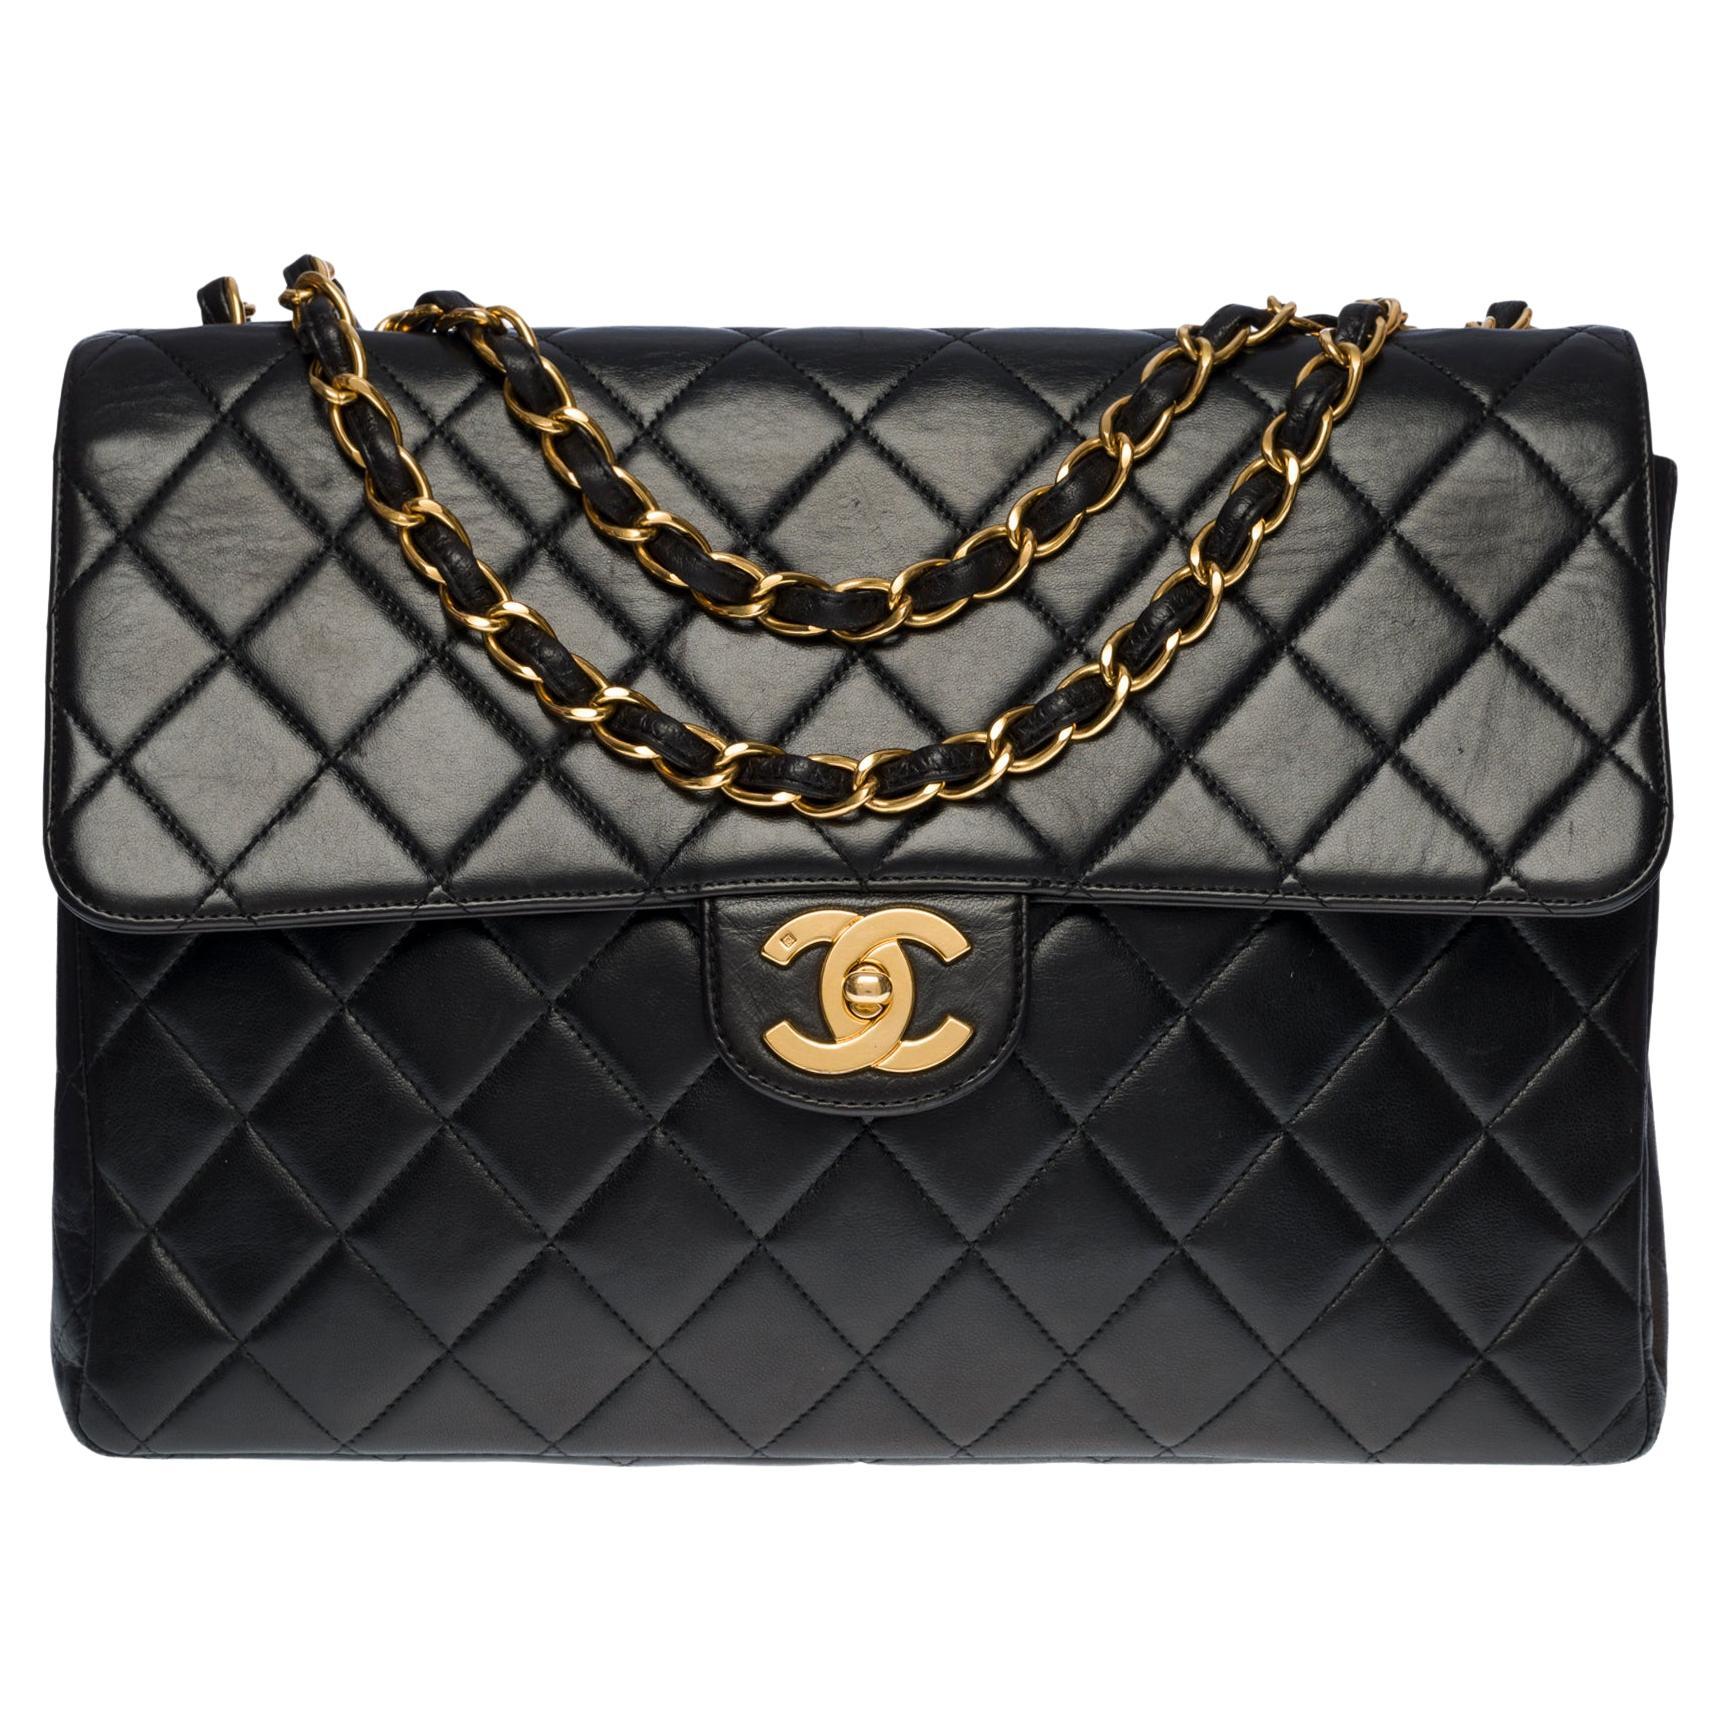 Chanel Timeless Jumbo single flap shoulder bag in black quilted lambskin, GHW For Sale